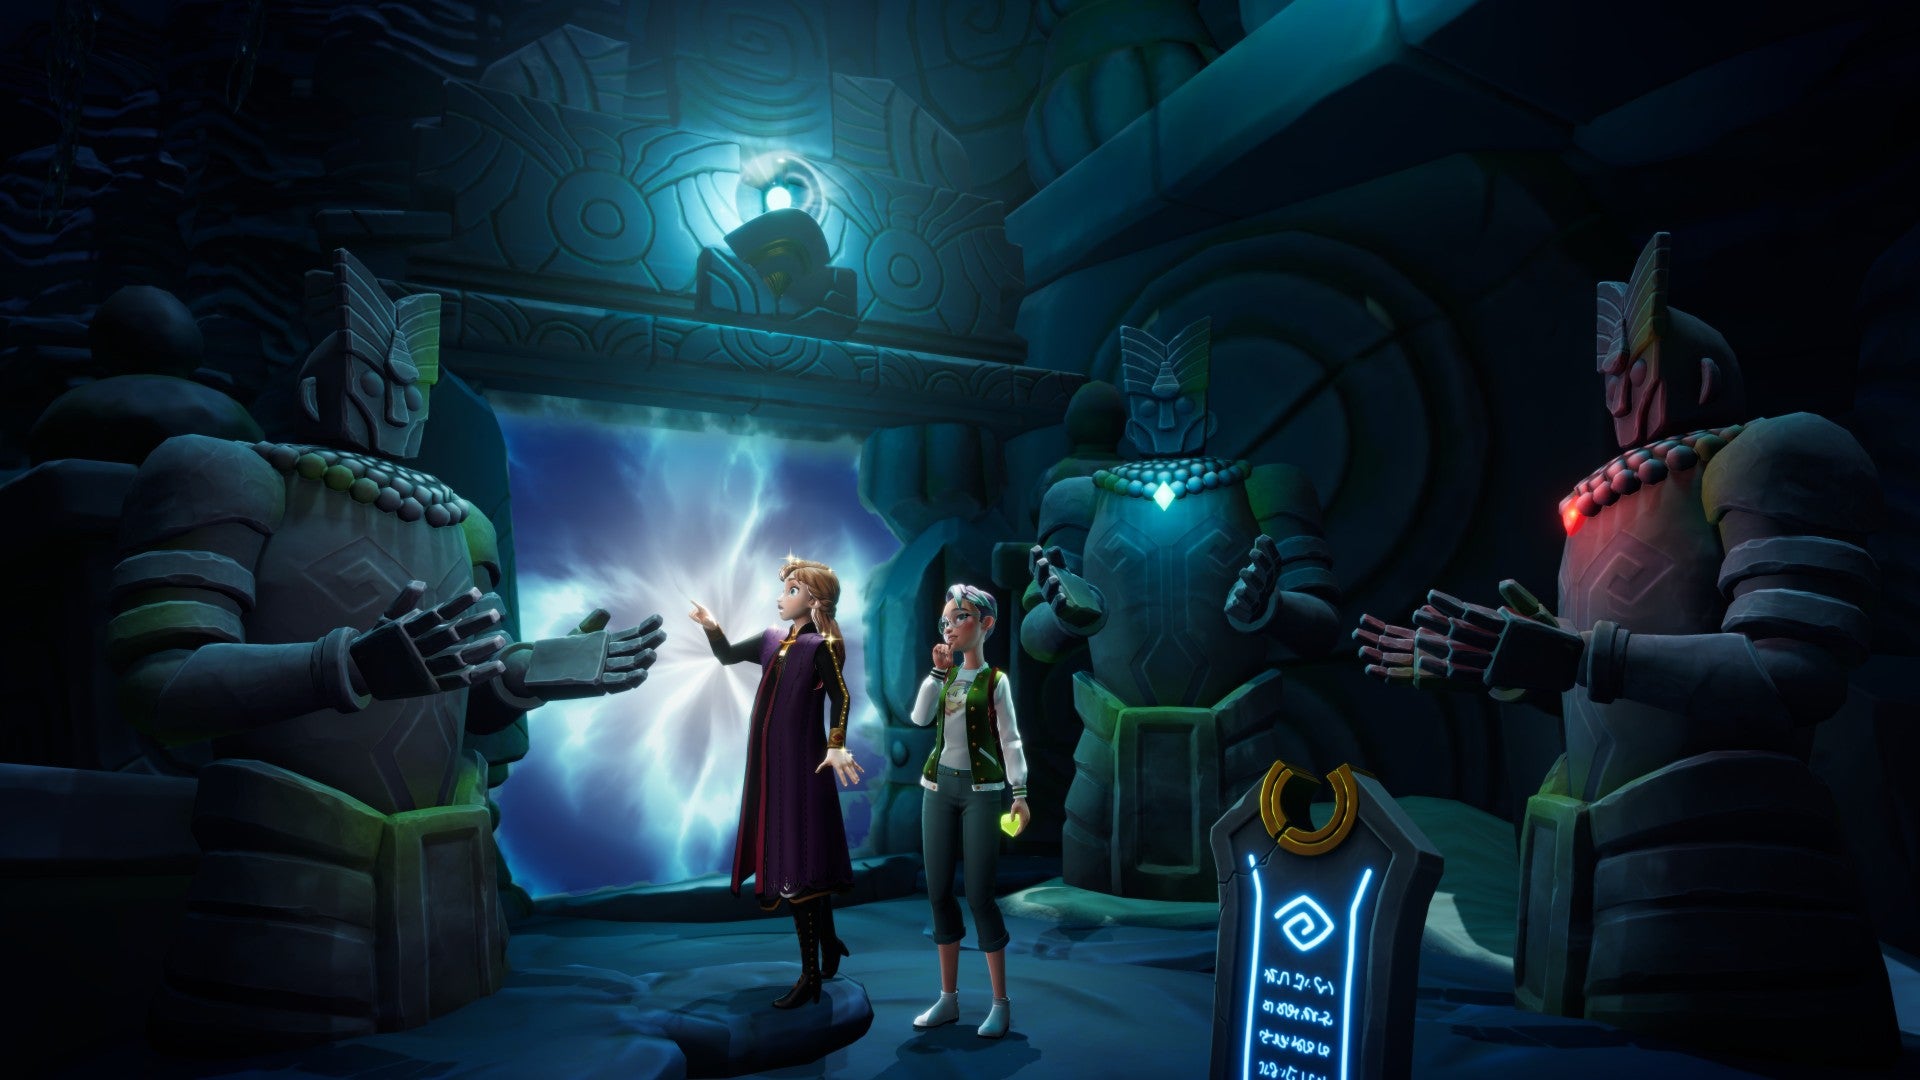 Disney Dreamlight Valley image showing a player with Anna examining a large stone statue in a cave.